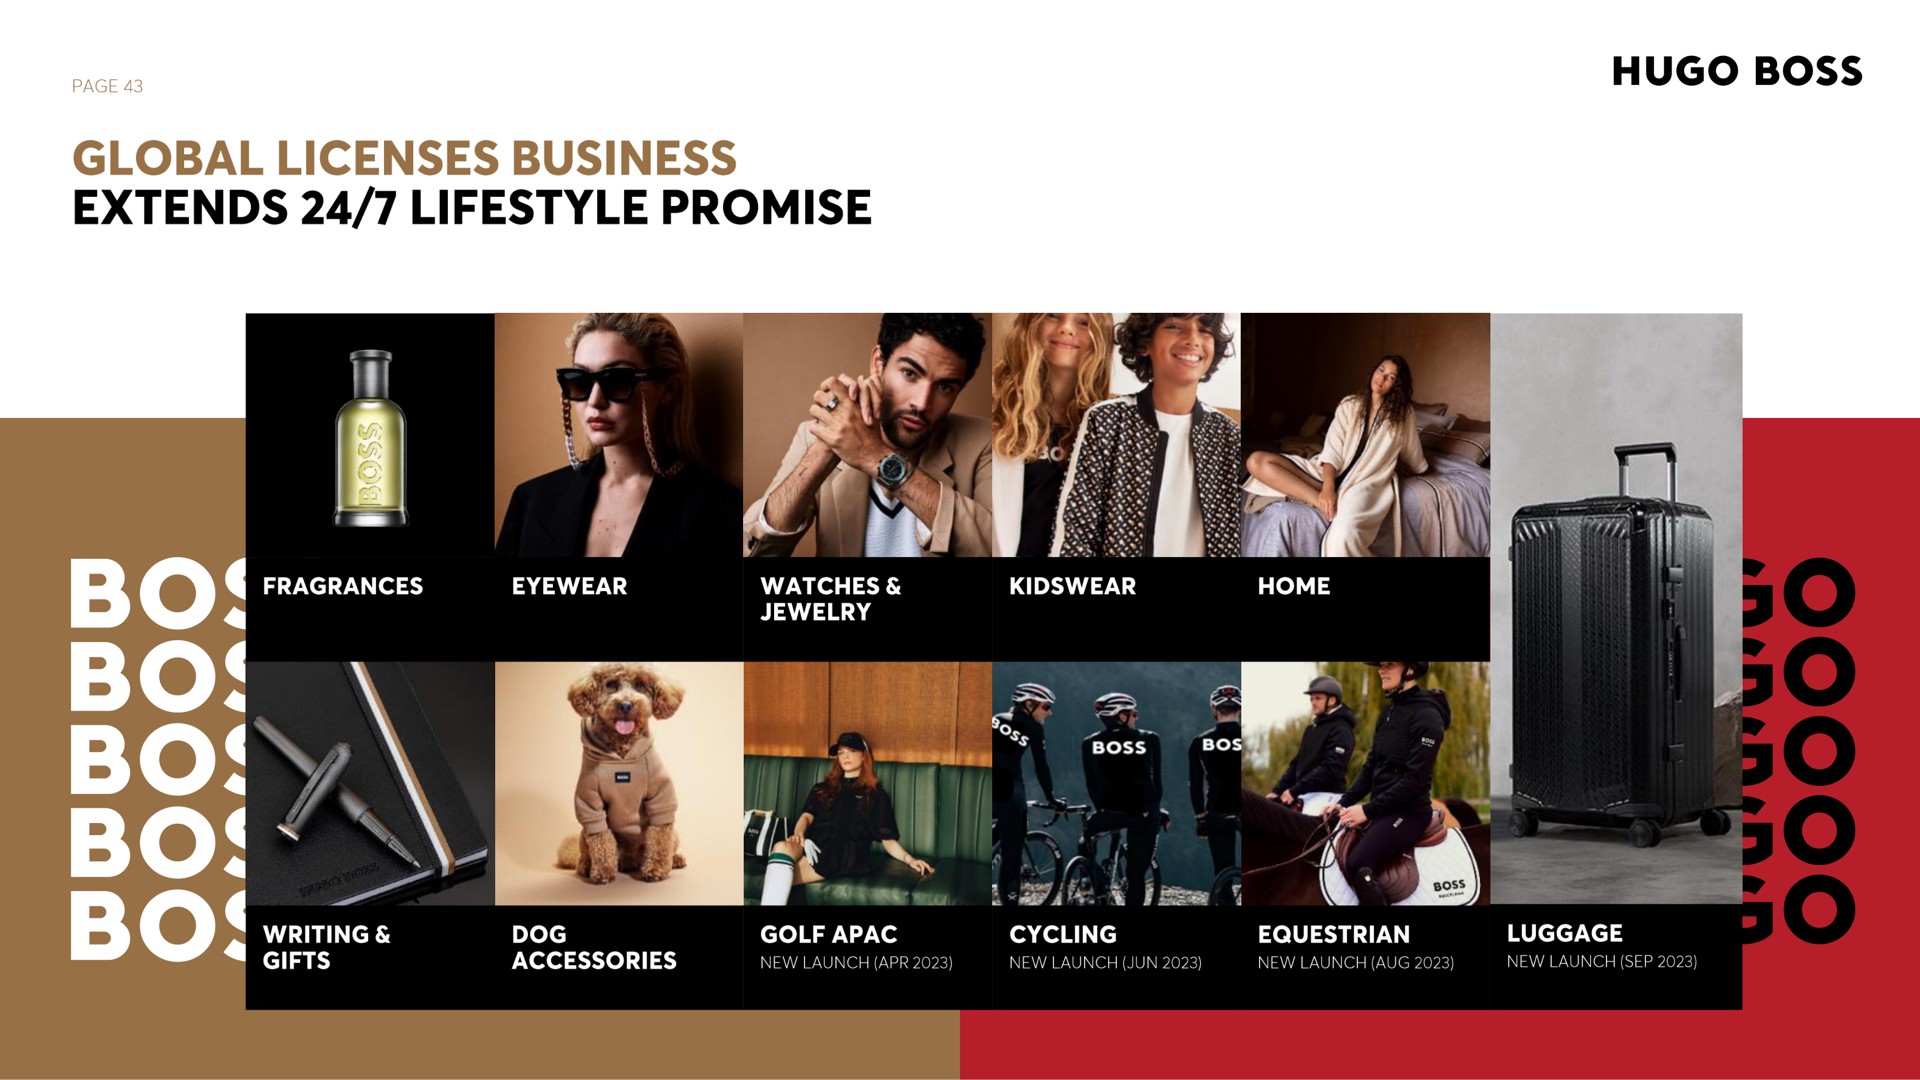 global licenses business extends promise boss dog a golf cycling equestrian luggage | Hugo Boss